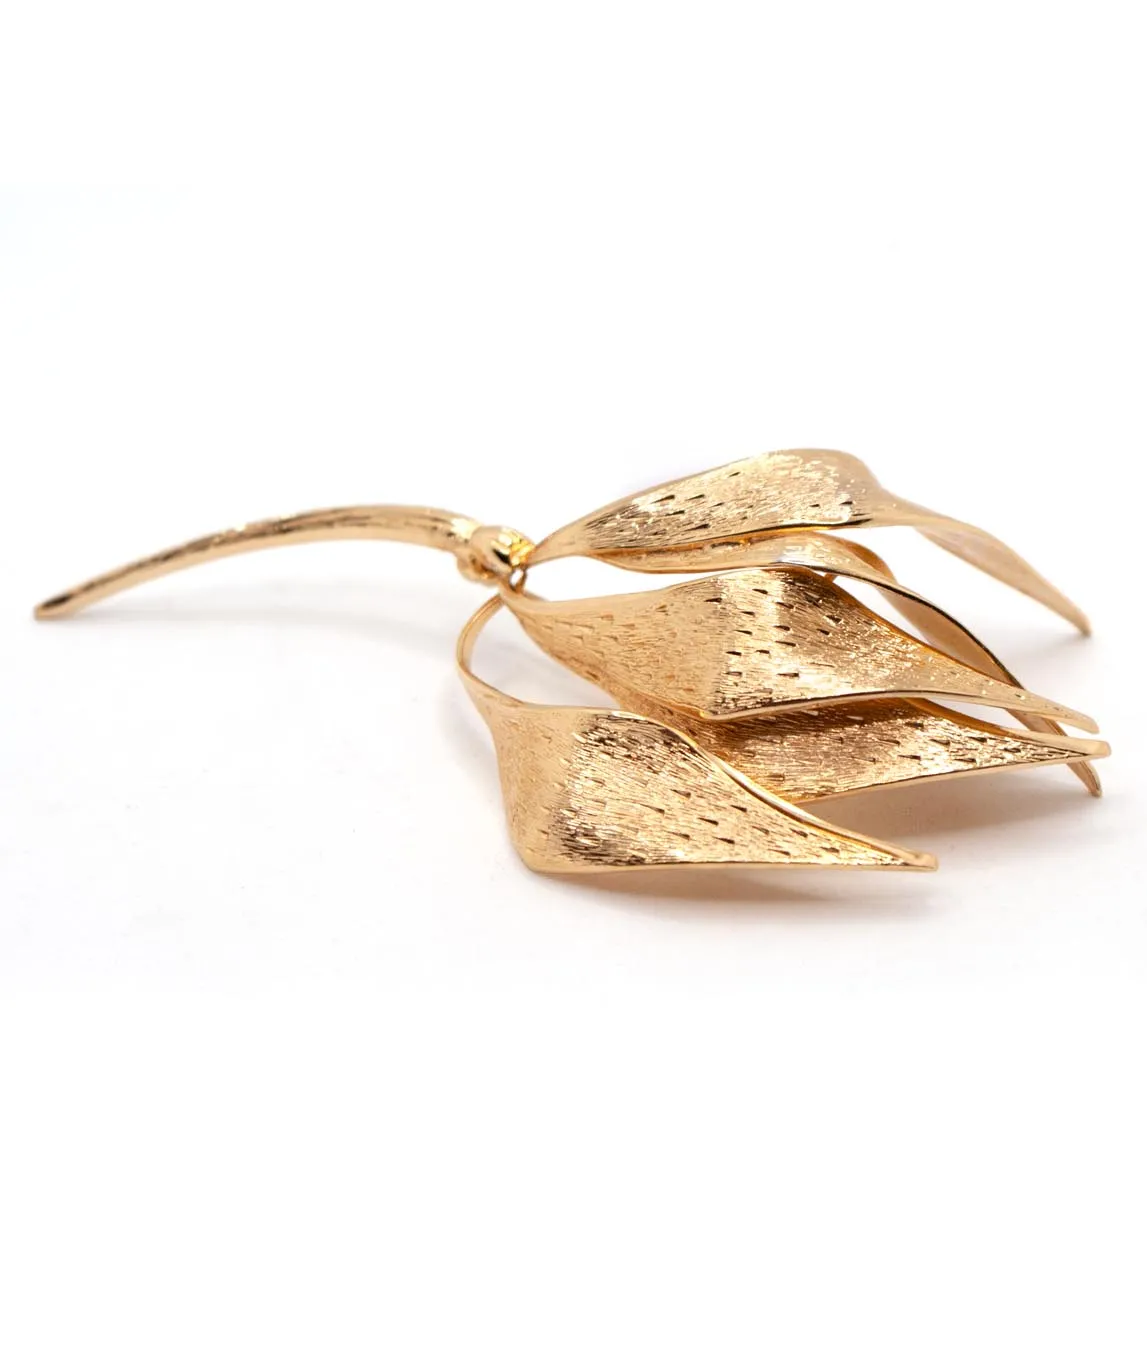 Gold-plated multi-leaf brooch by Henkel and Grosse with textured metal leaves